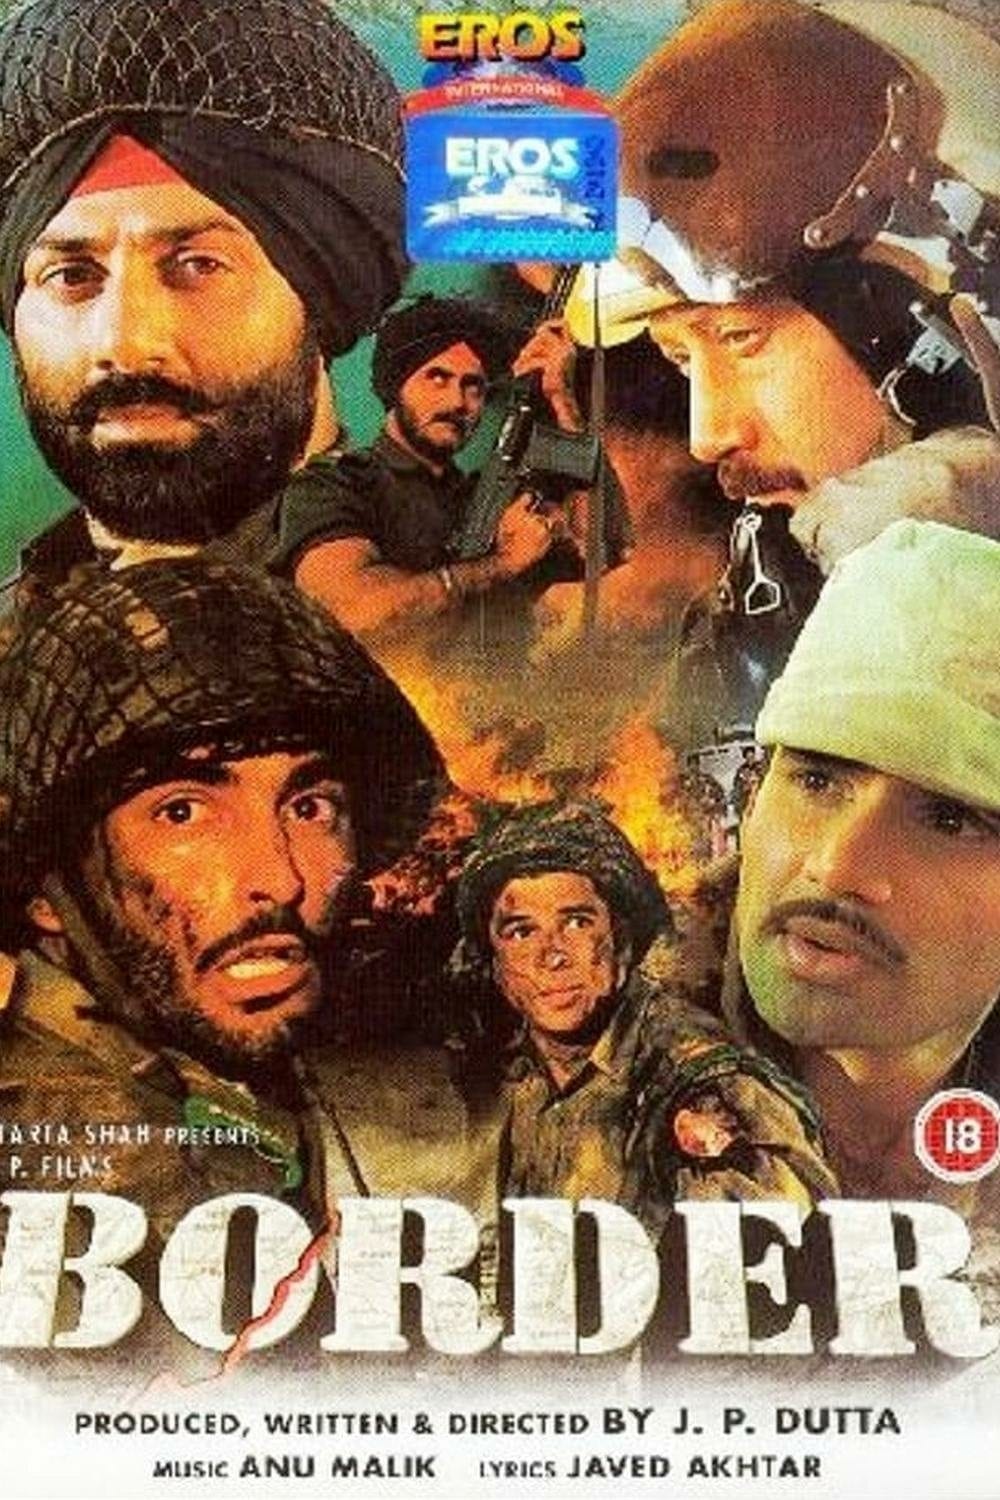 Poster for the movie "Border"